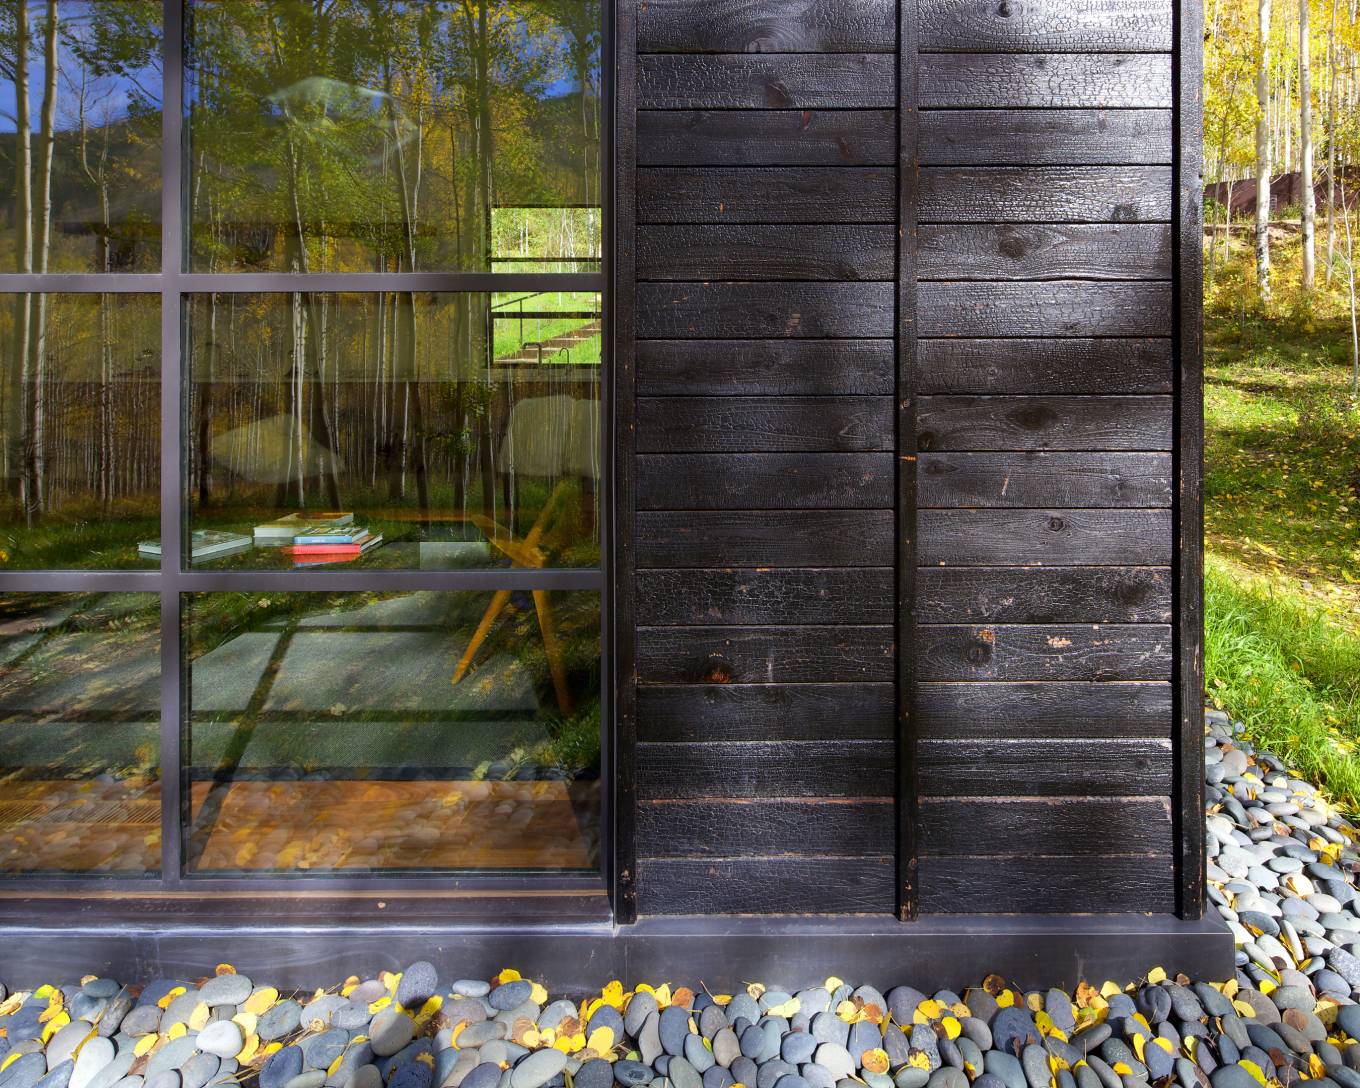 he vertical battens on the charred cedar siding were chosen to relate to the immense verticality established by the trees.